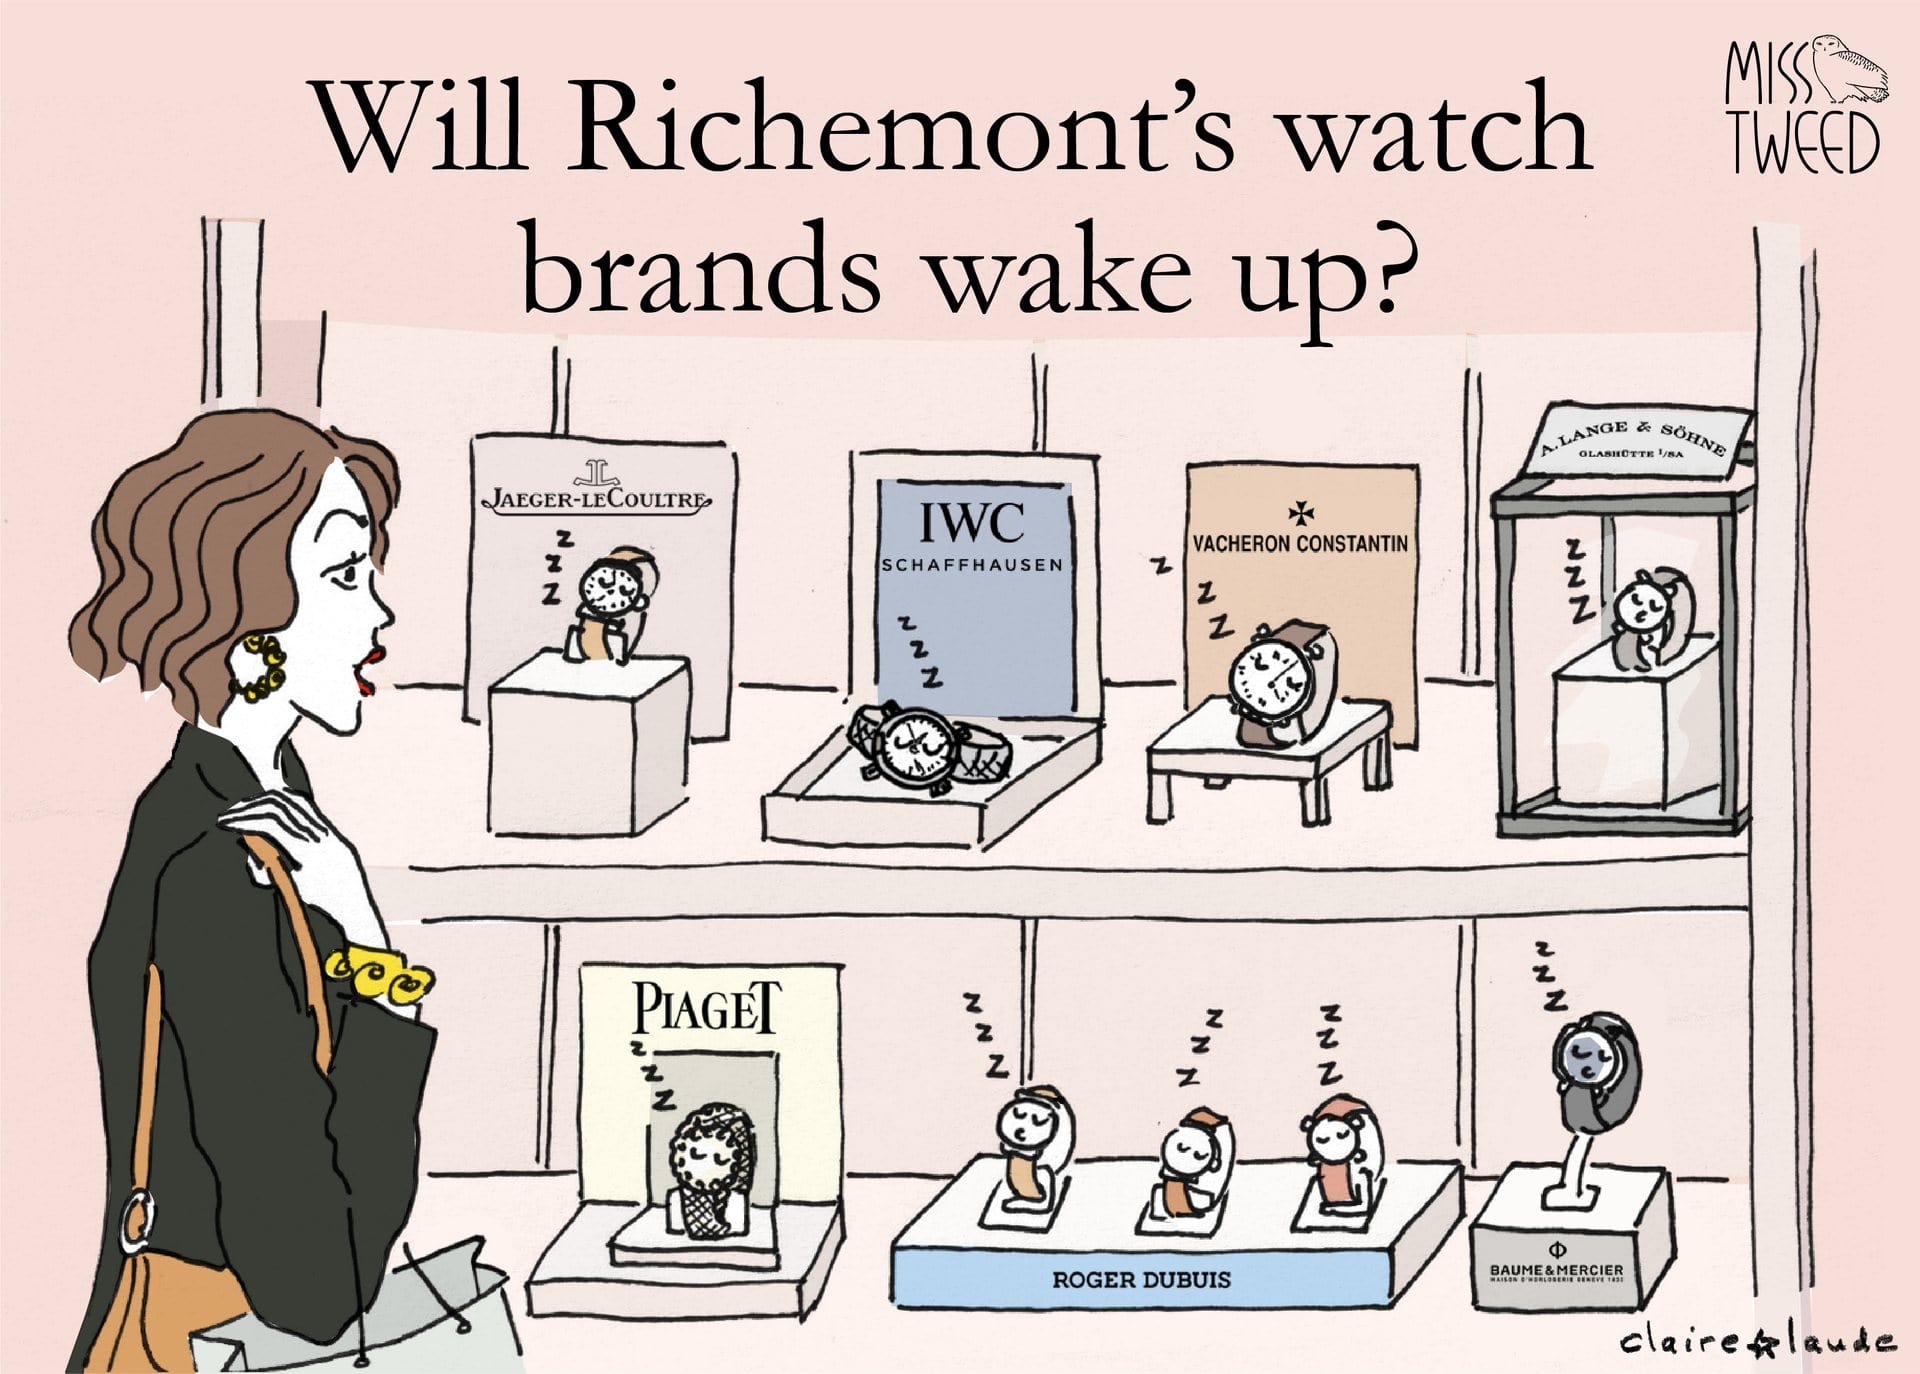 Can Richemont put some magic back into its watch brands? 
